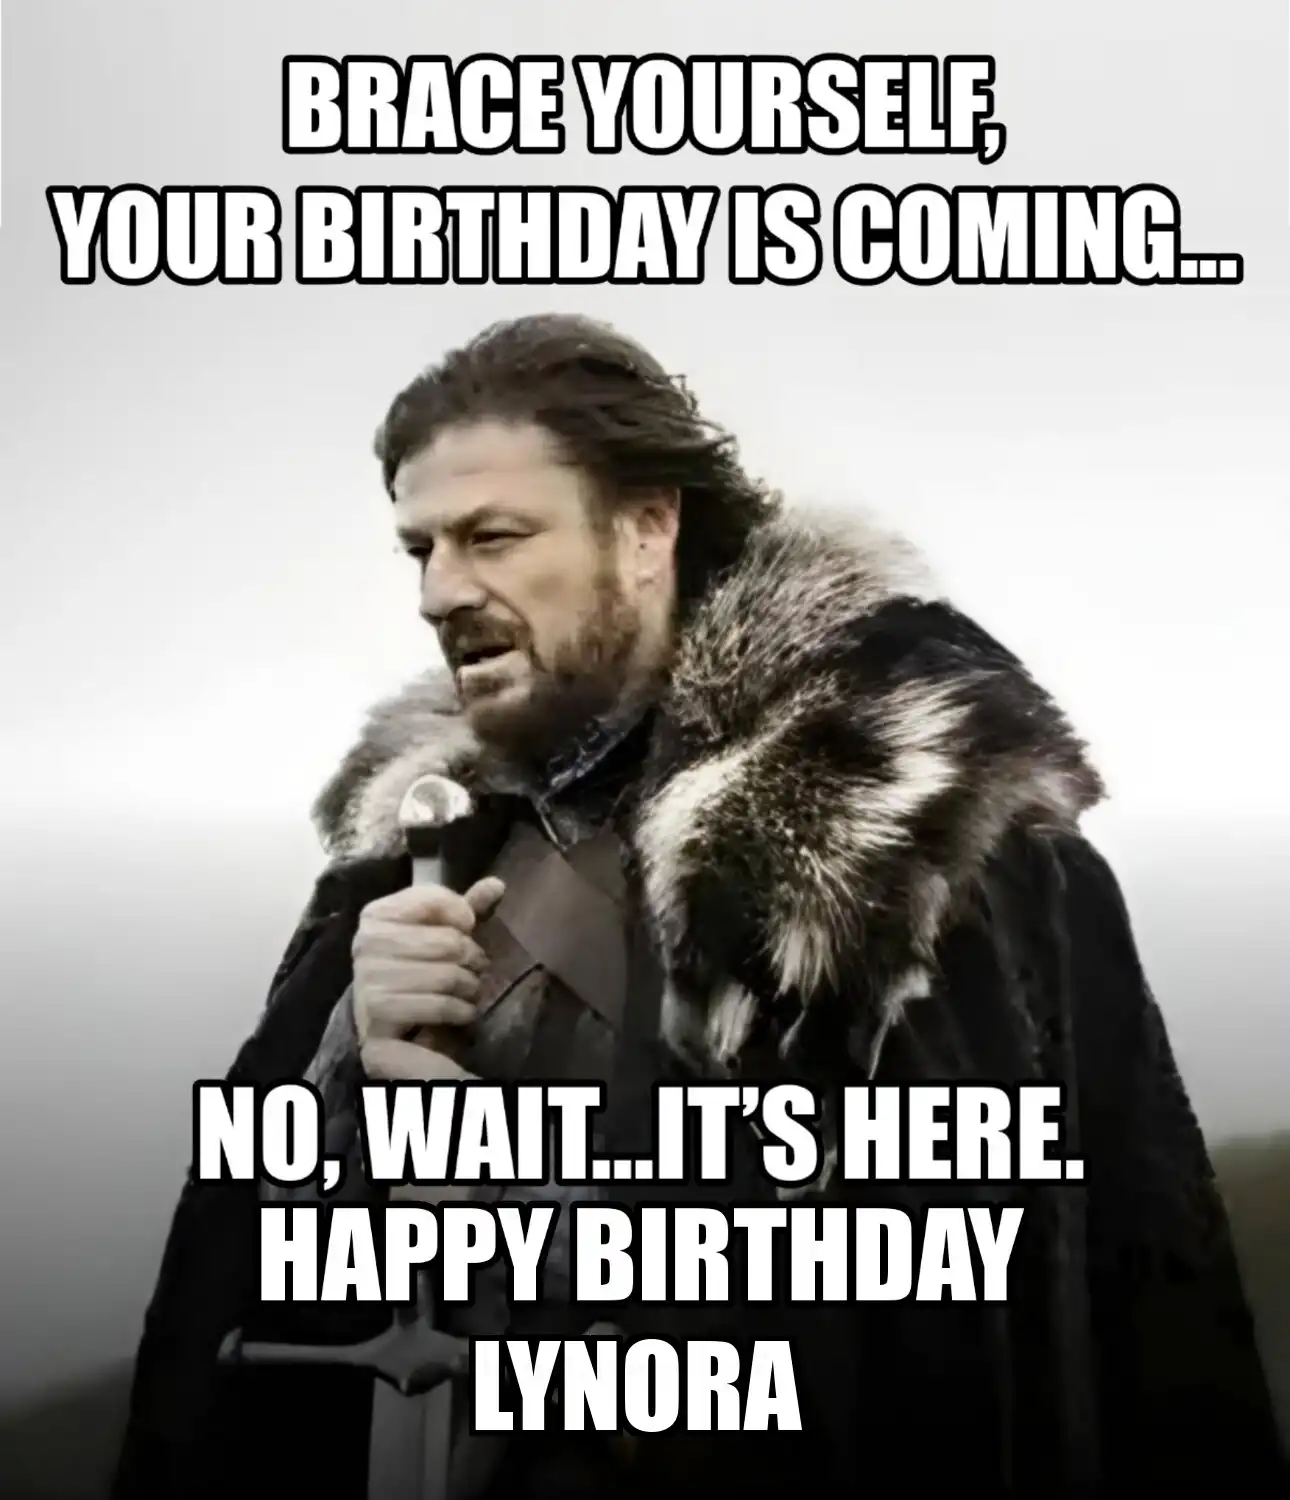 Happy Birthday Lynora Brace Yourself Your Birthday Is Coming Meme